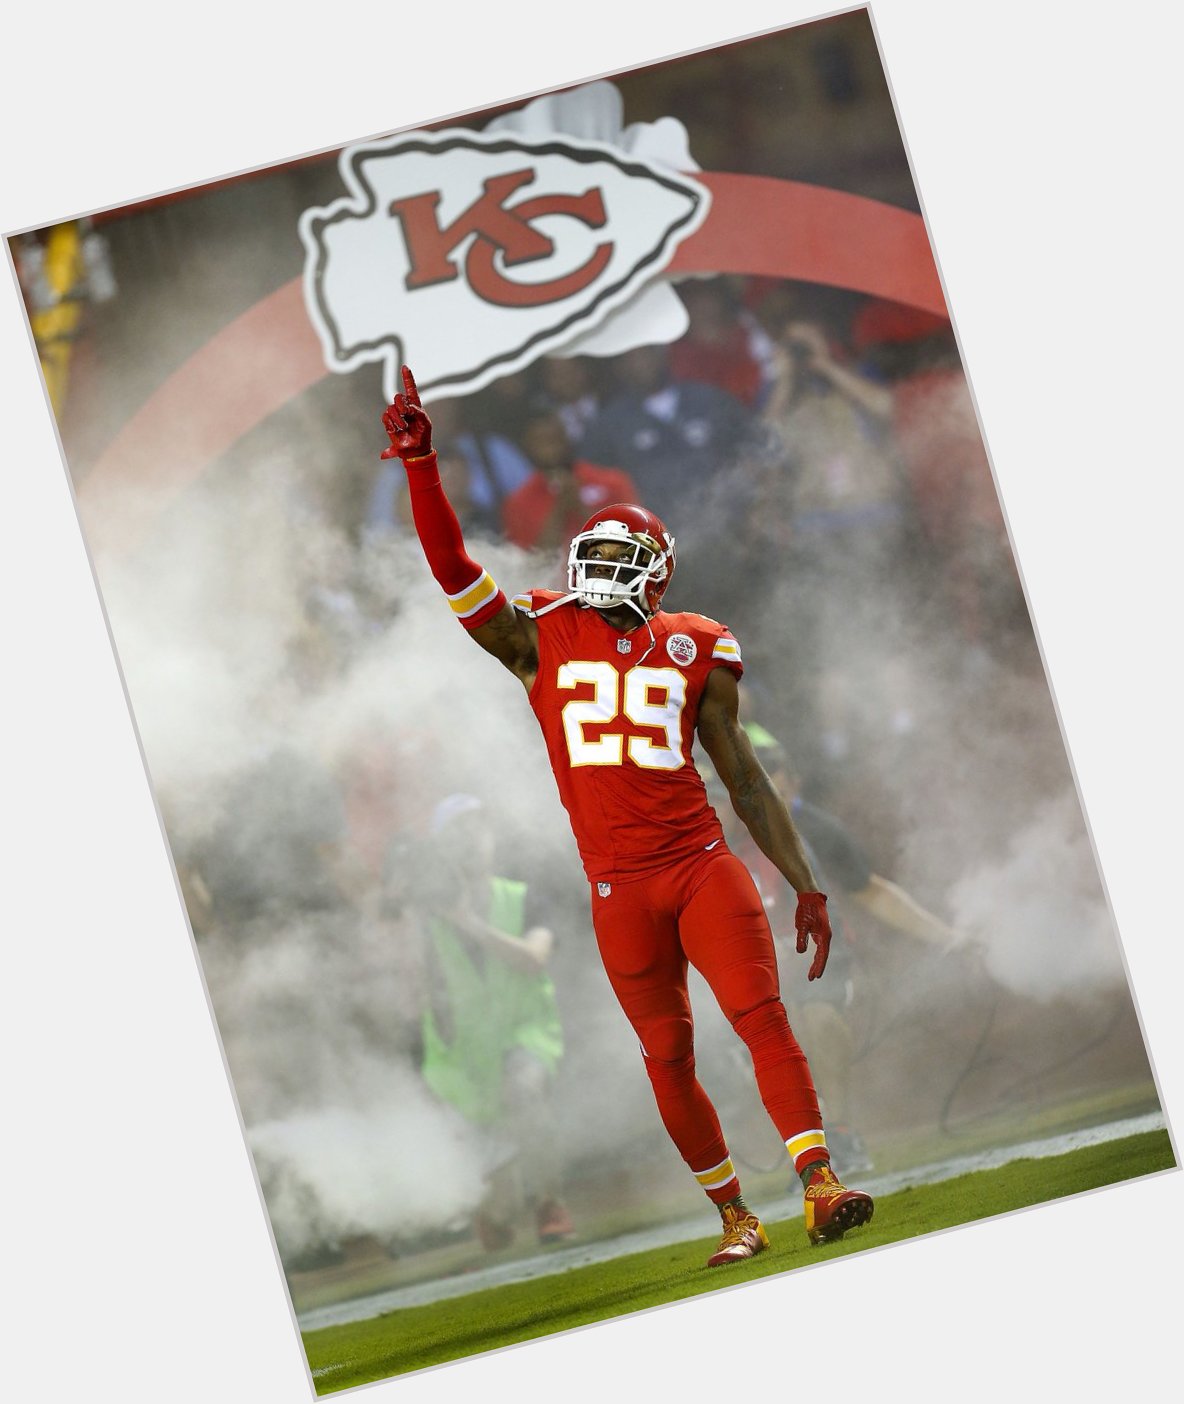 Happy Birthday to Eric Berry who turns 29 today! 